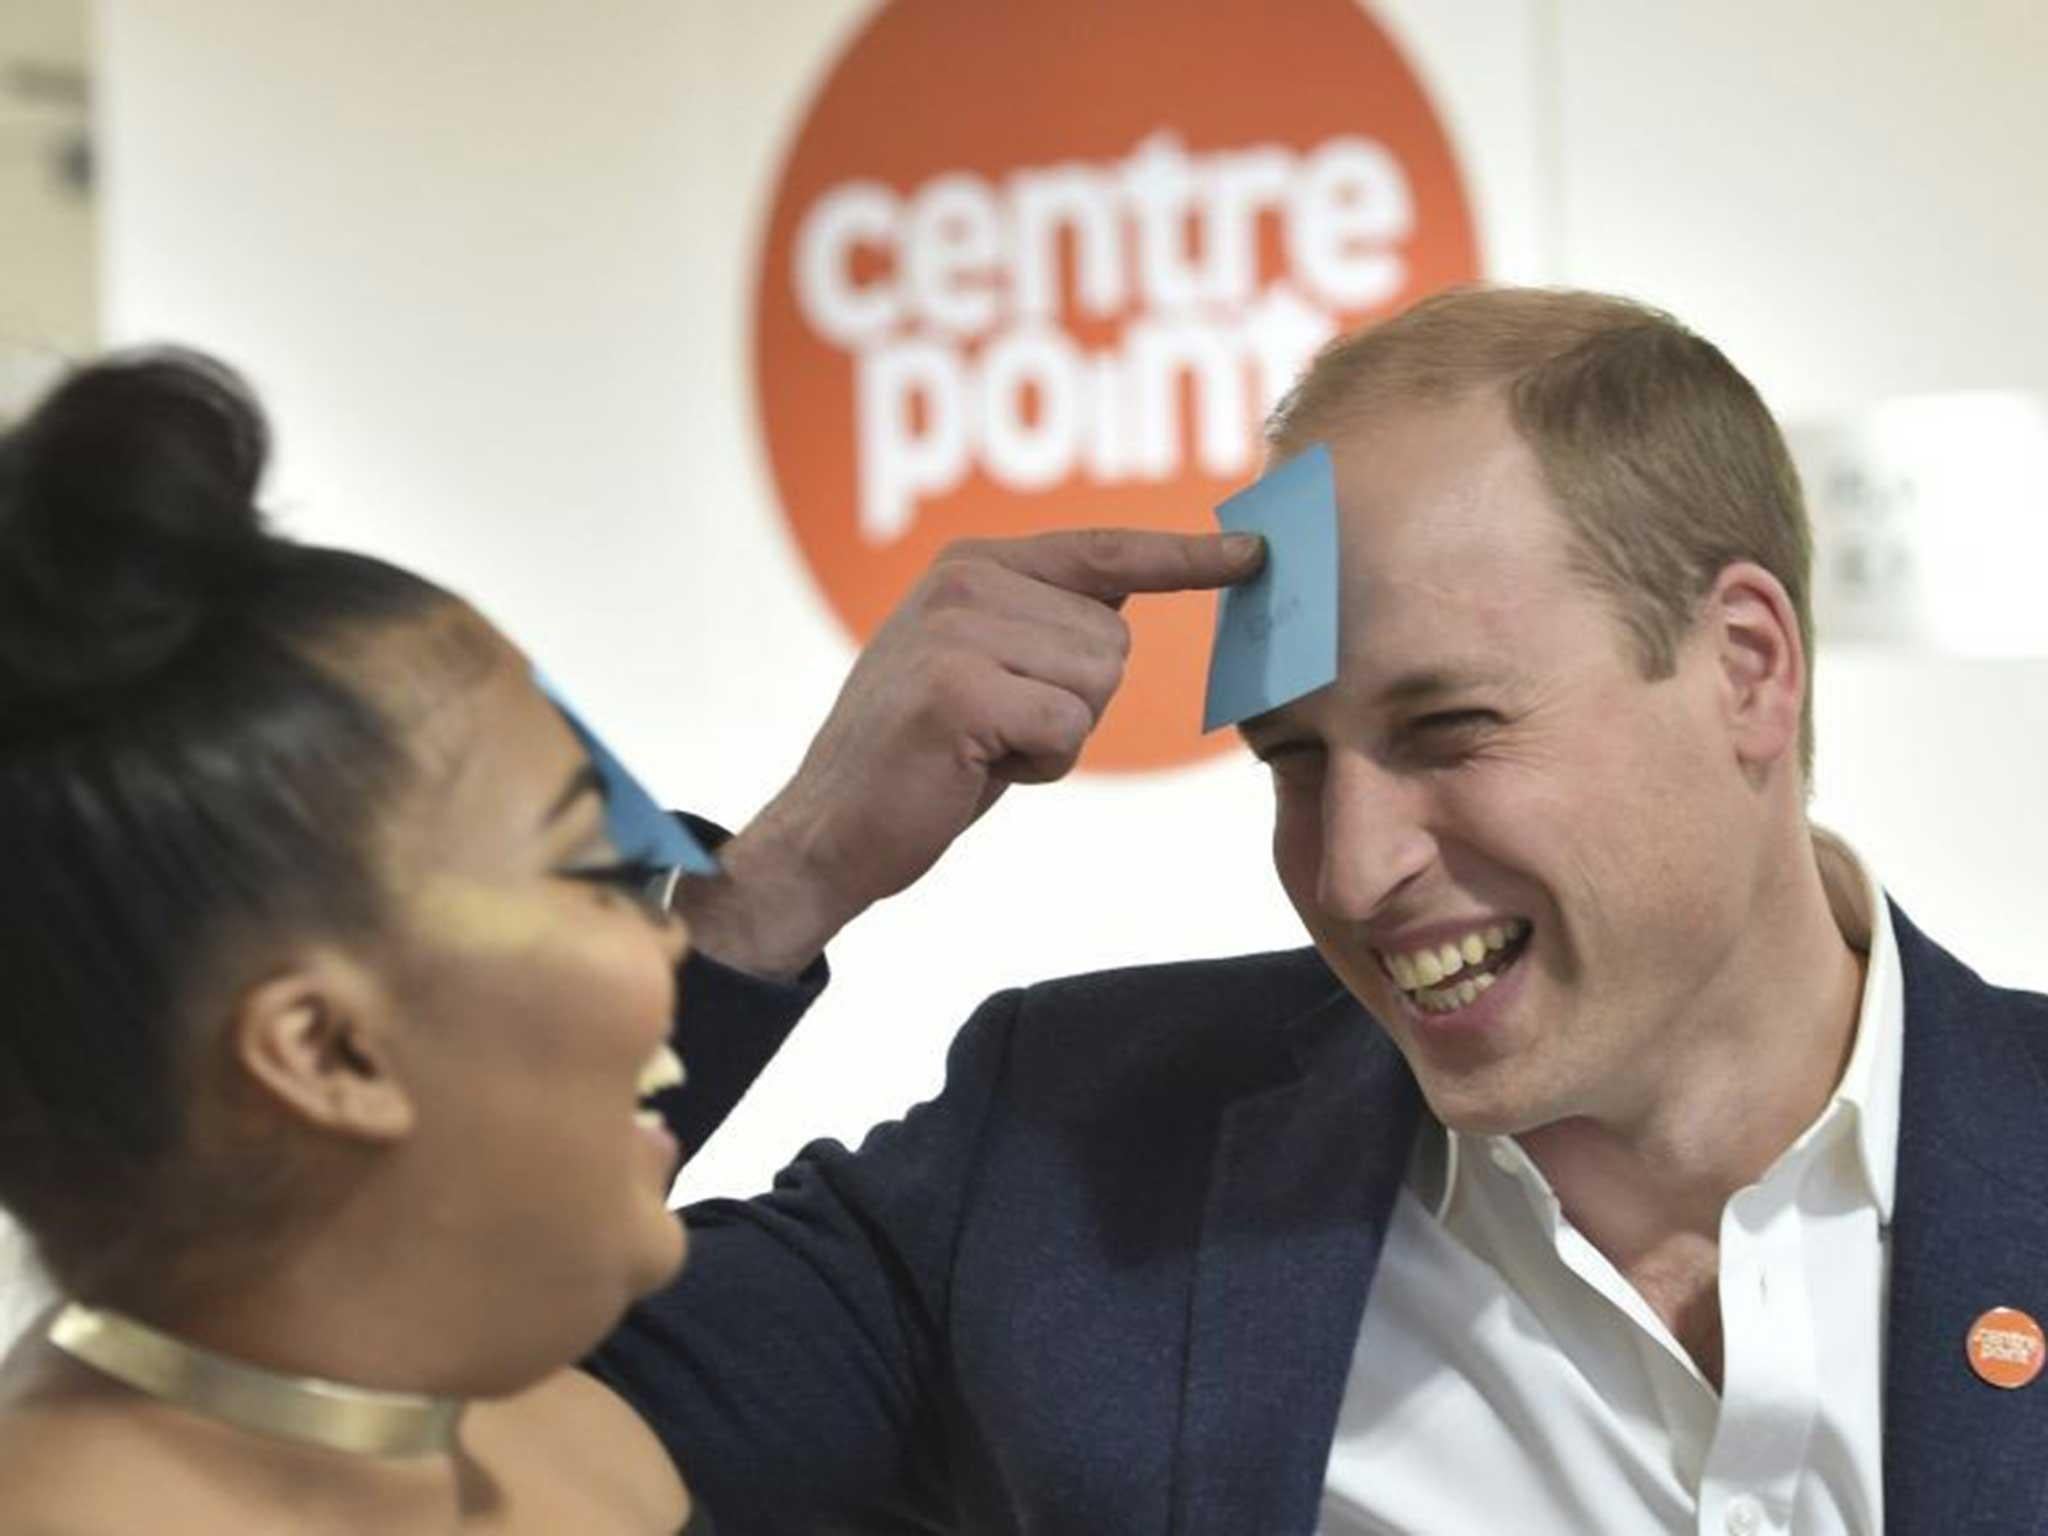 The Duke of Cambridge plays a guessing game at a Centrepoint hostel, asking around, ‘Am I famous?’